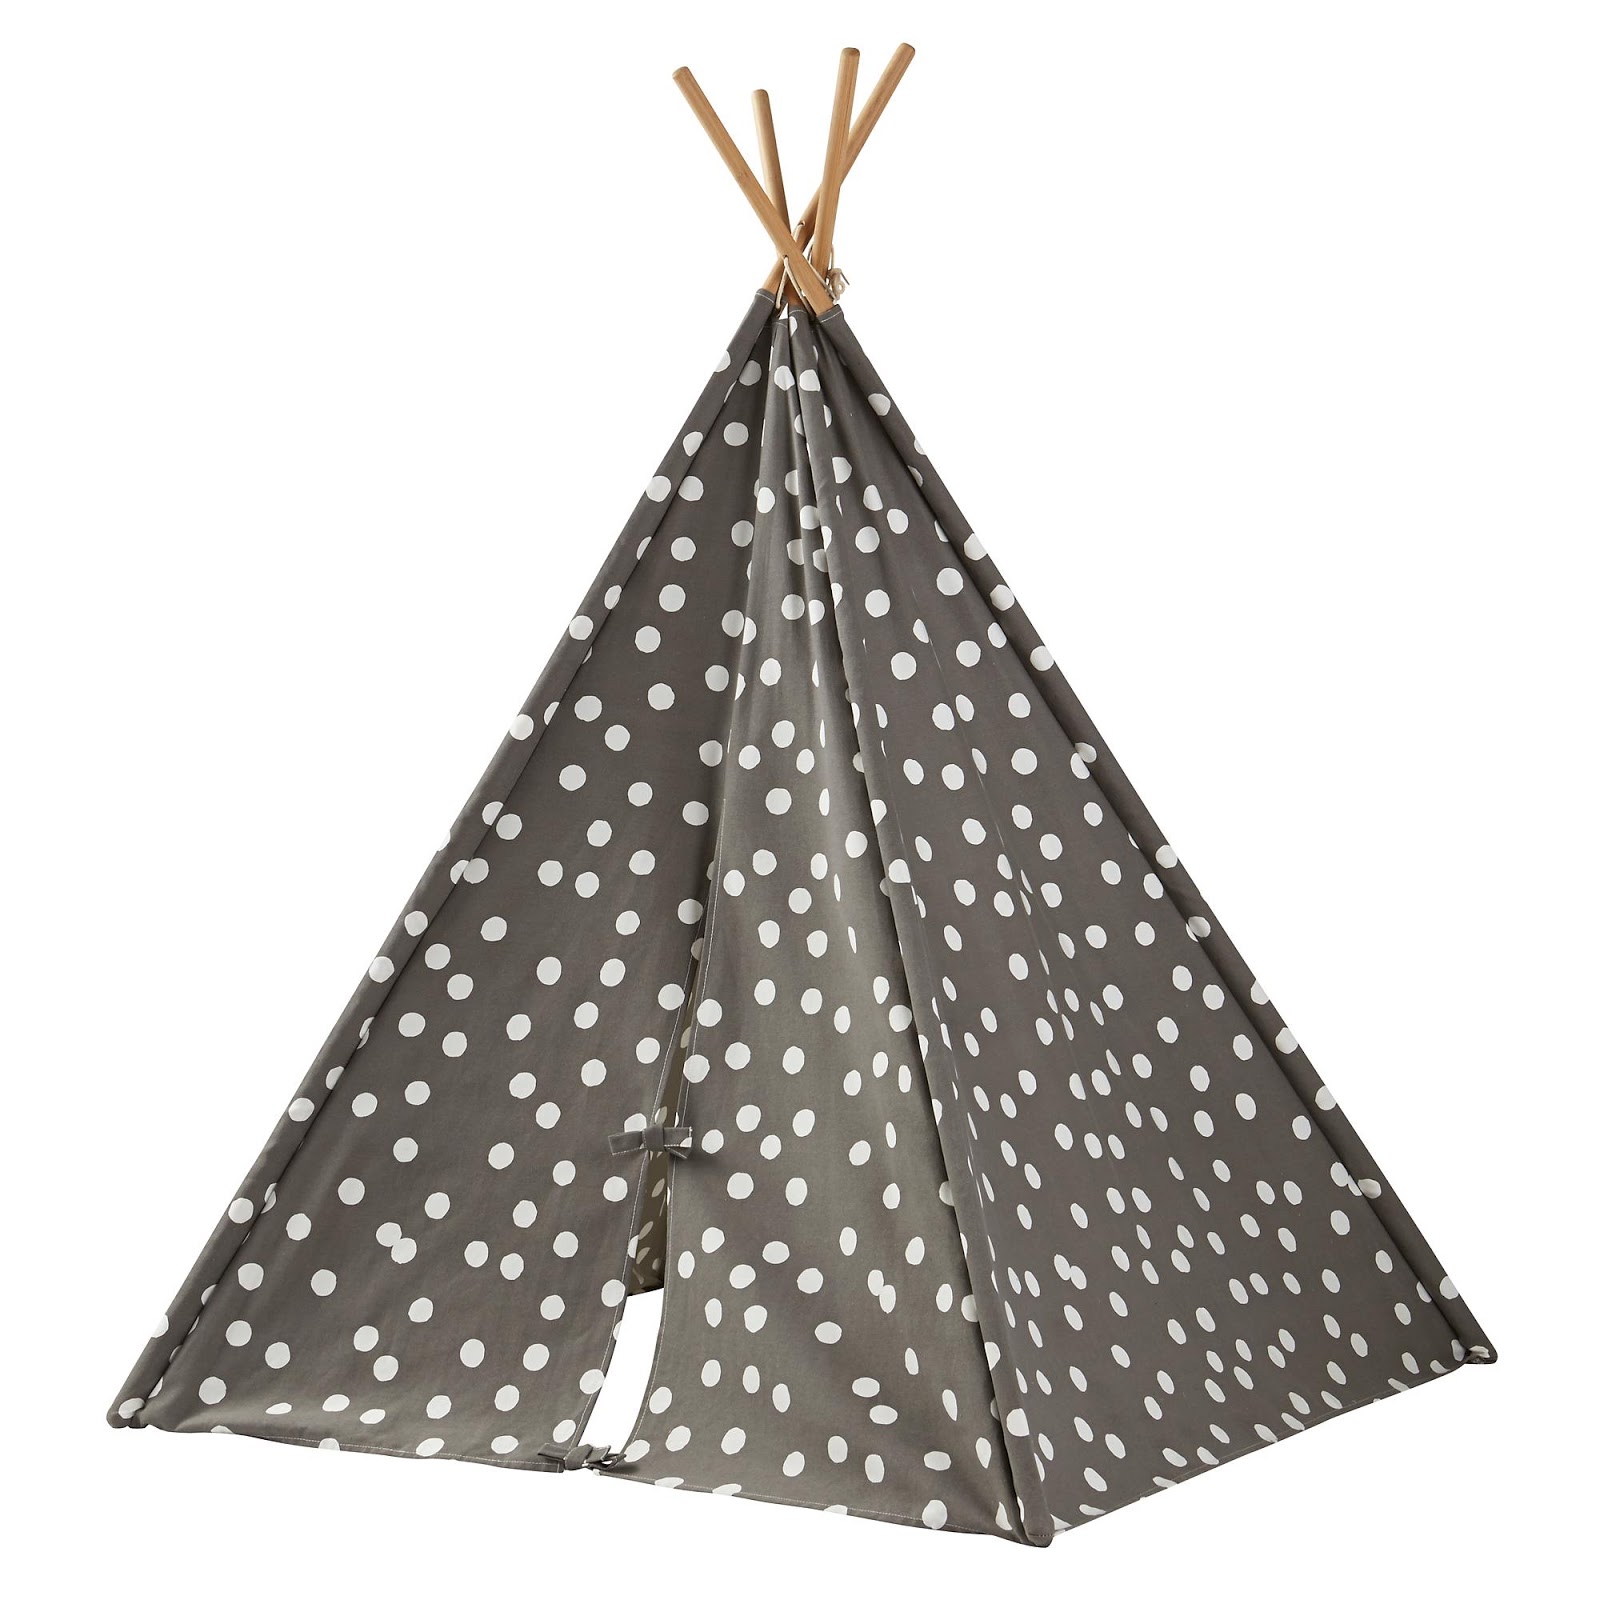 Polka-dot teepee giveaway from The Land of Nod